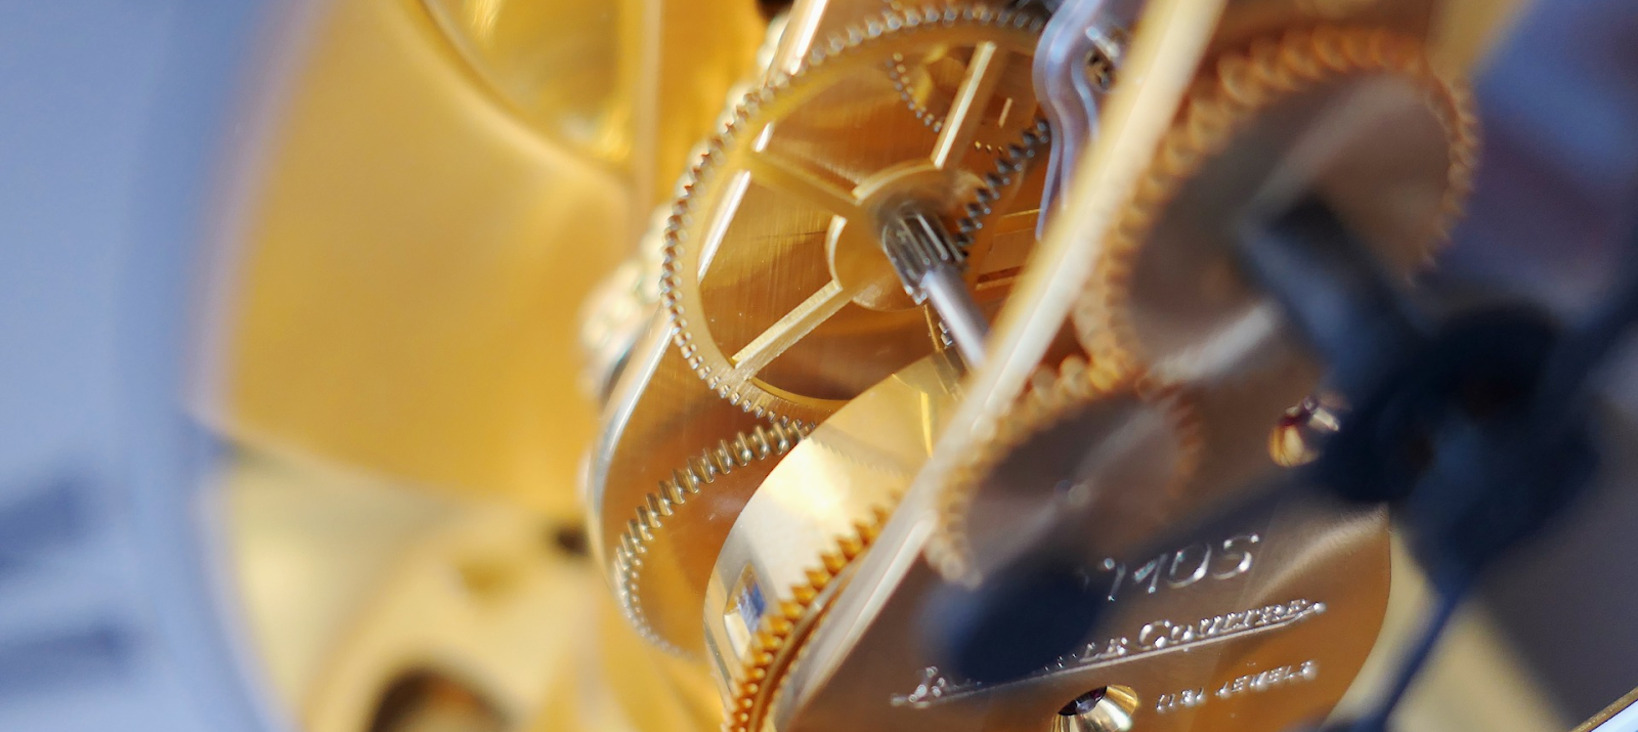 A close-up photo of the mechanics of a clock, showcasing its intricate details. The clock is made up of several gears appearing of fine texture and looking to have a golden color.